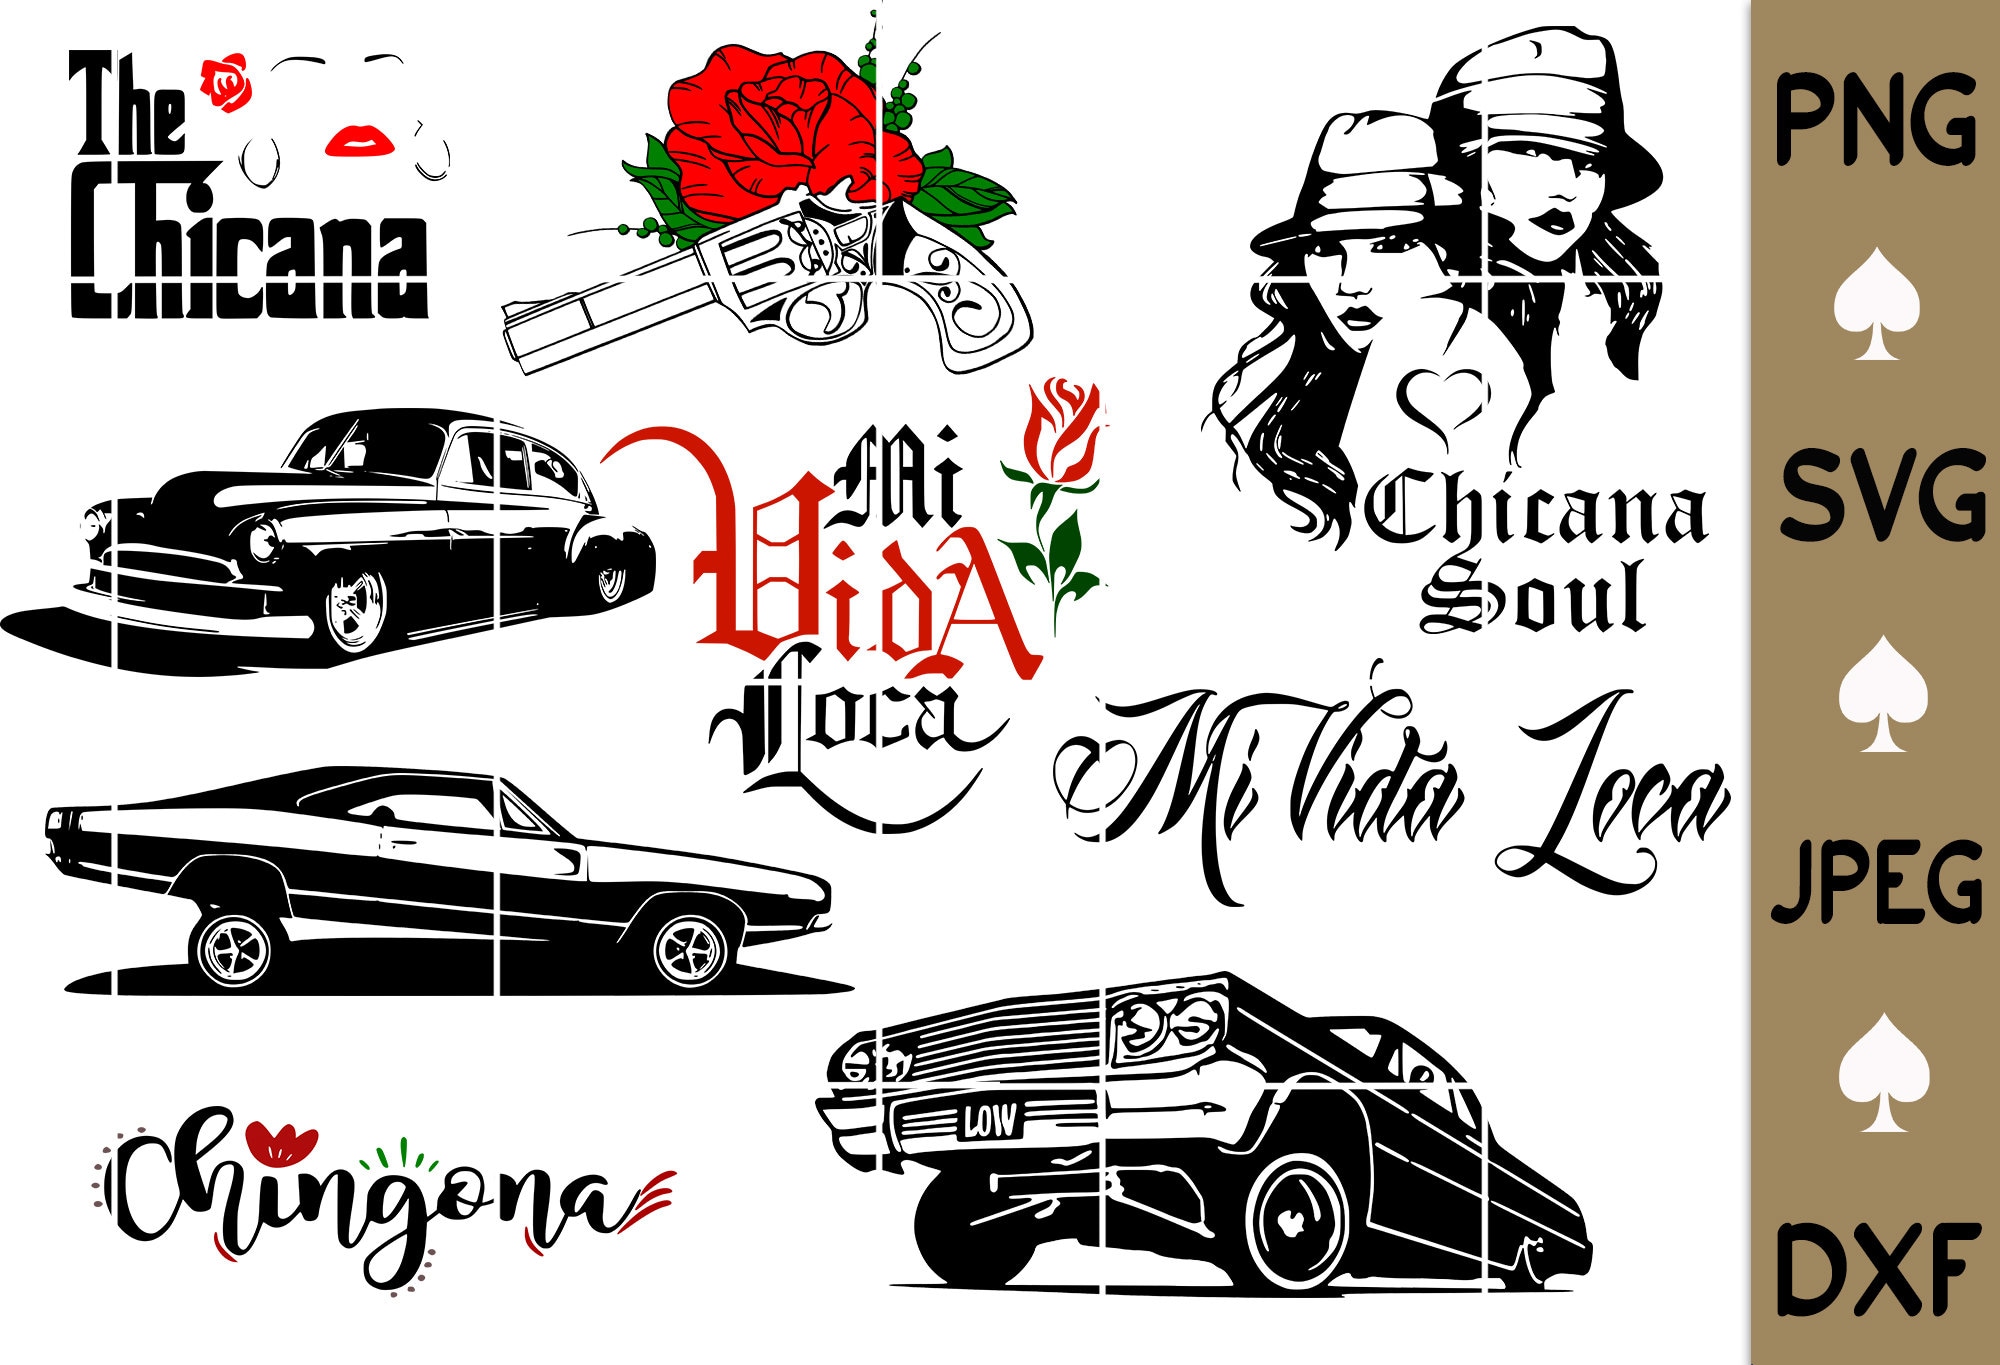 Low Life svg Lowrider svg Low Low svg Cholo svg Lowrider Veterano svg Veteran svg Veterano svg